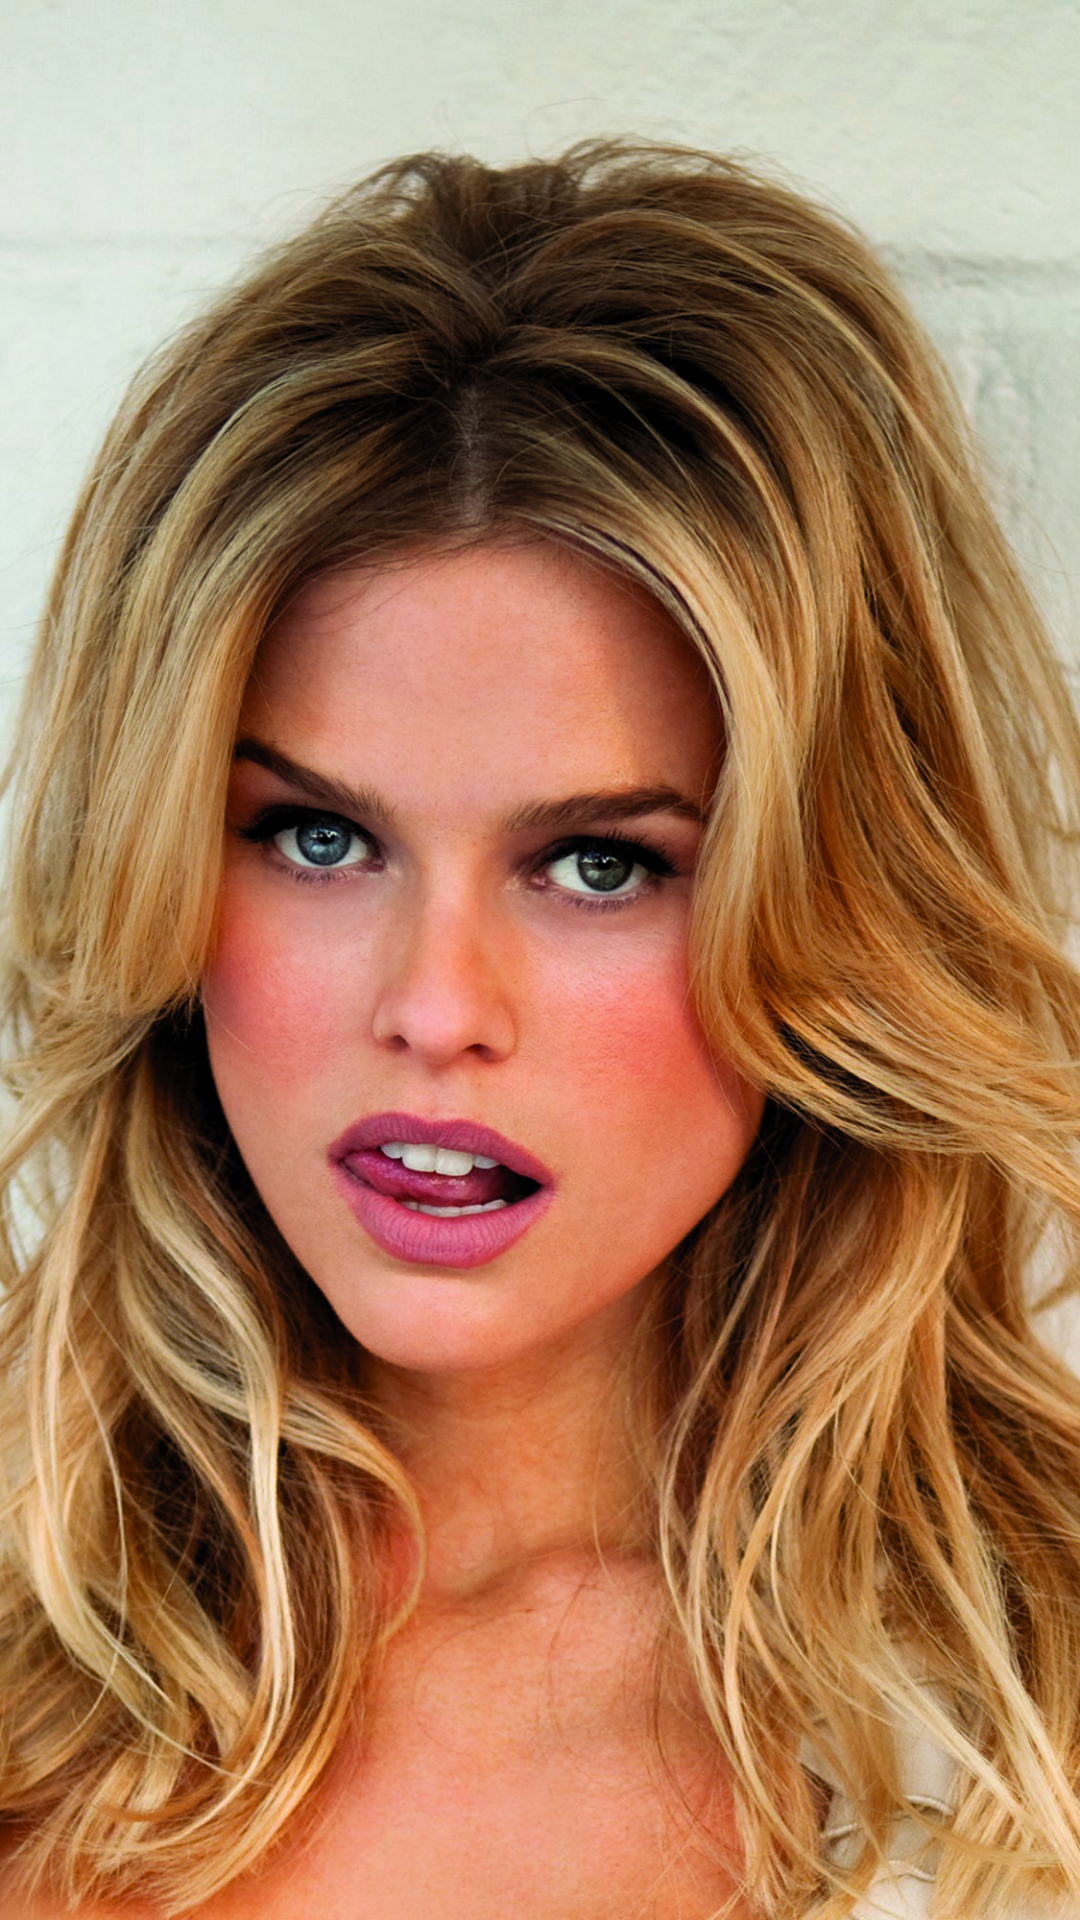 celebrity, alice eve, actress, blonde wallpaper for mobile